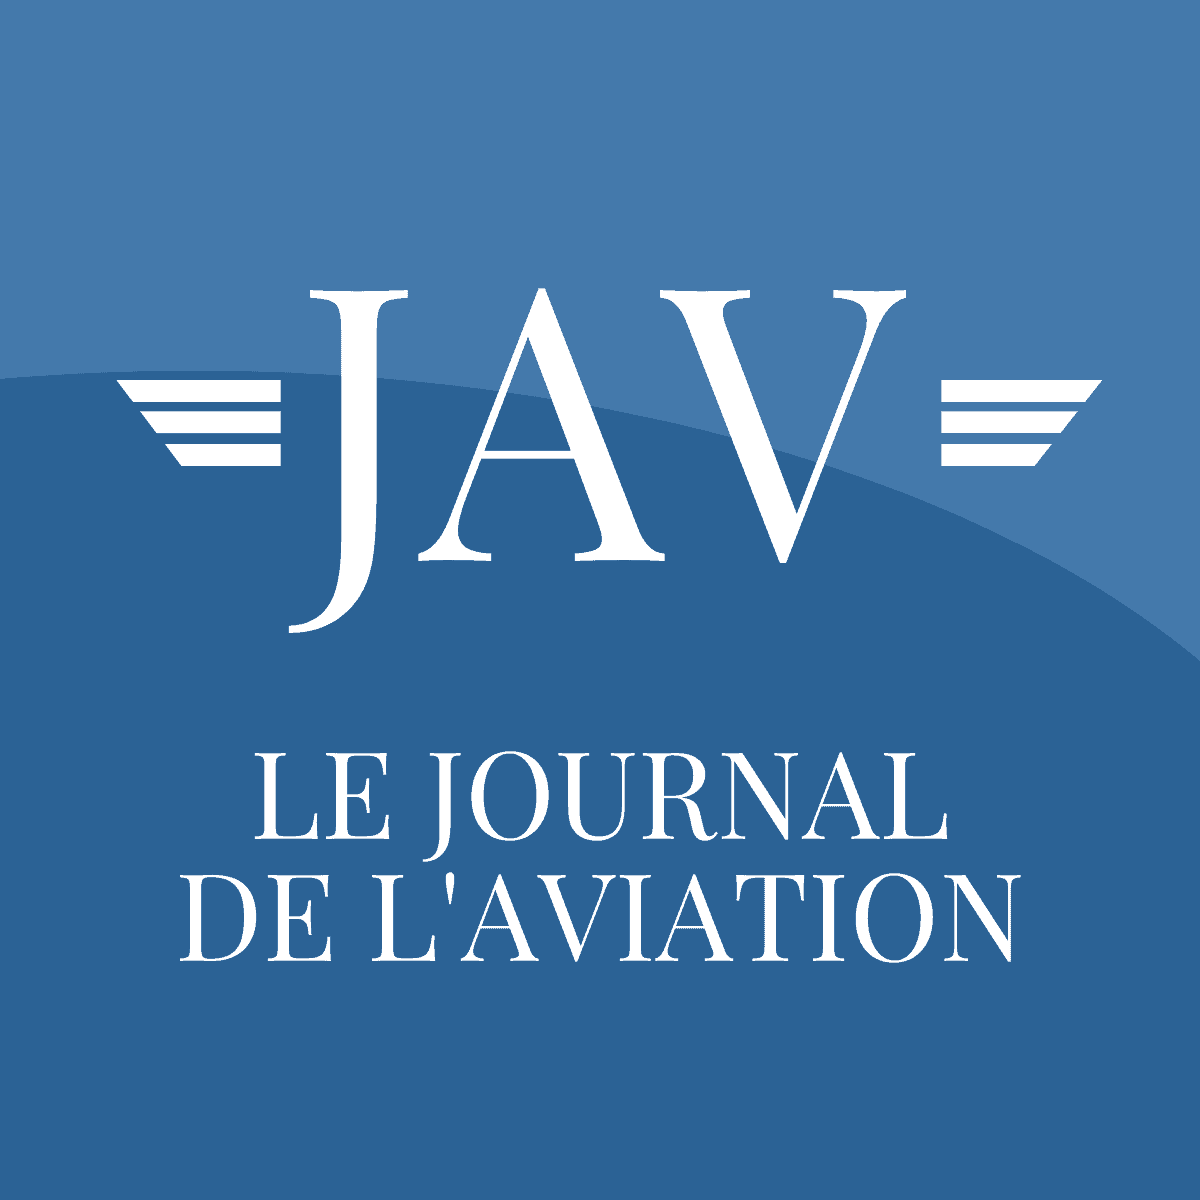 The joural of aviation talks about CorsoPatch Aircraft and our recent flight tests